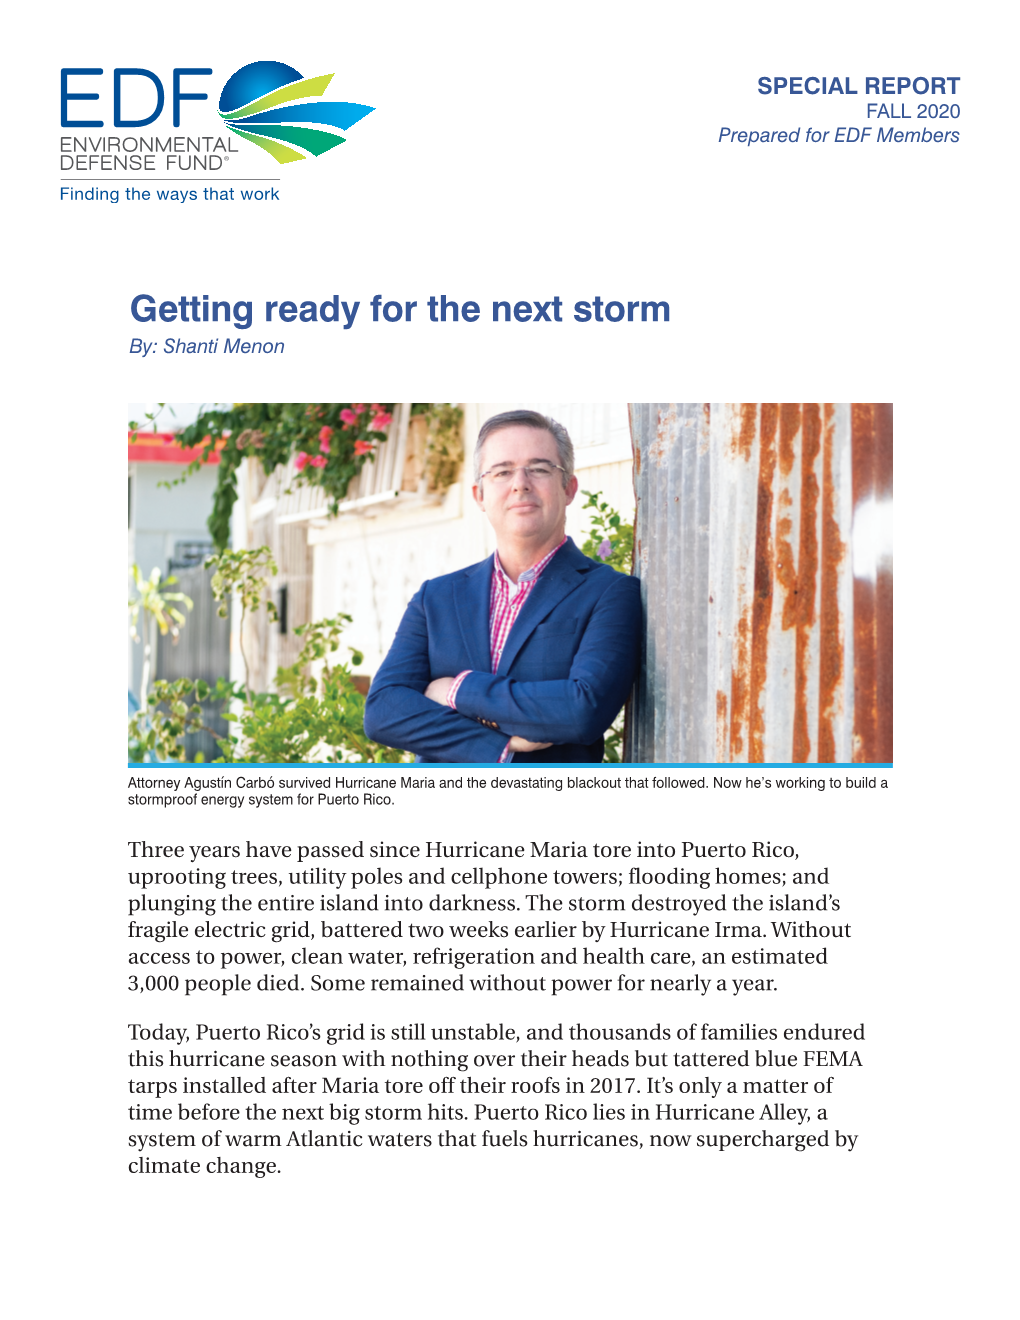 Getting Ready for the Next Storm By: Shanti Menon